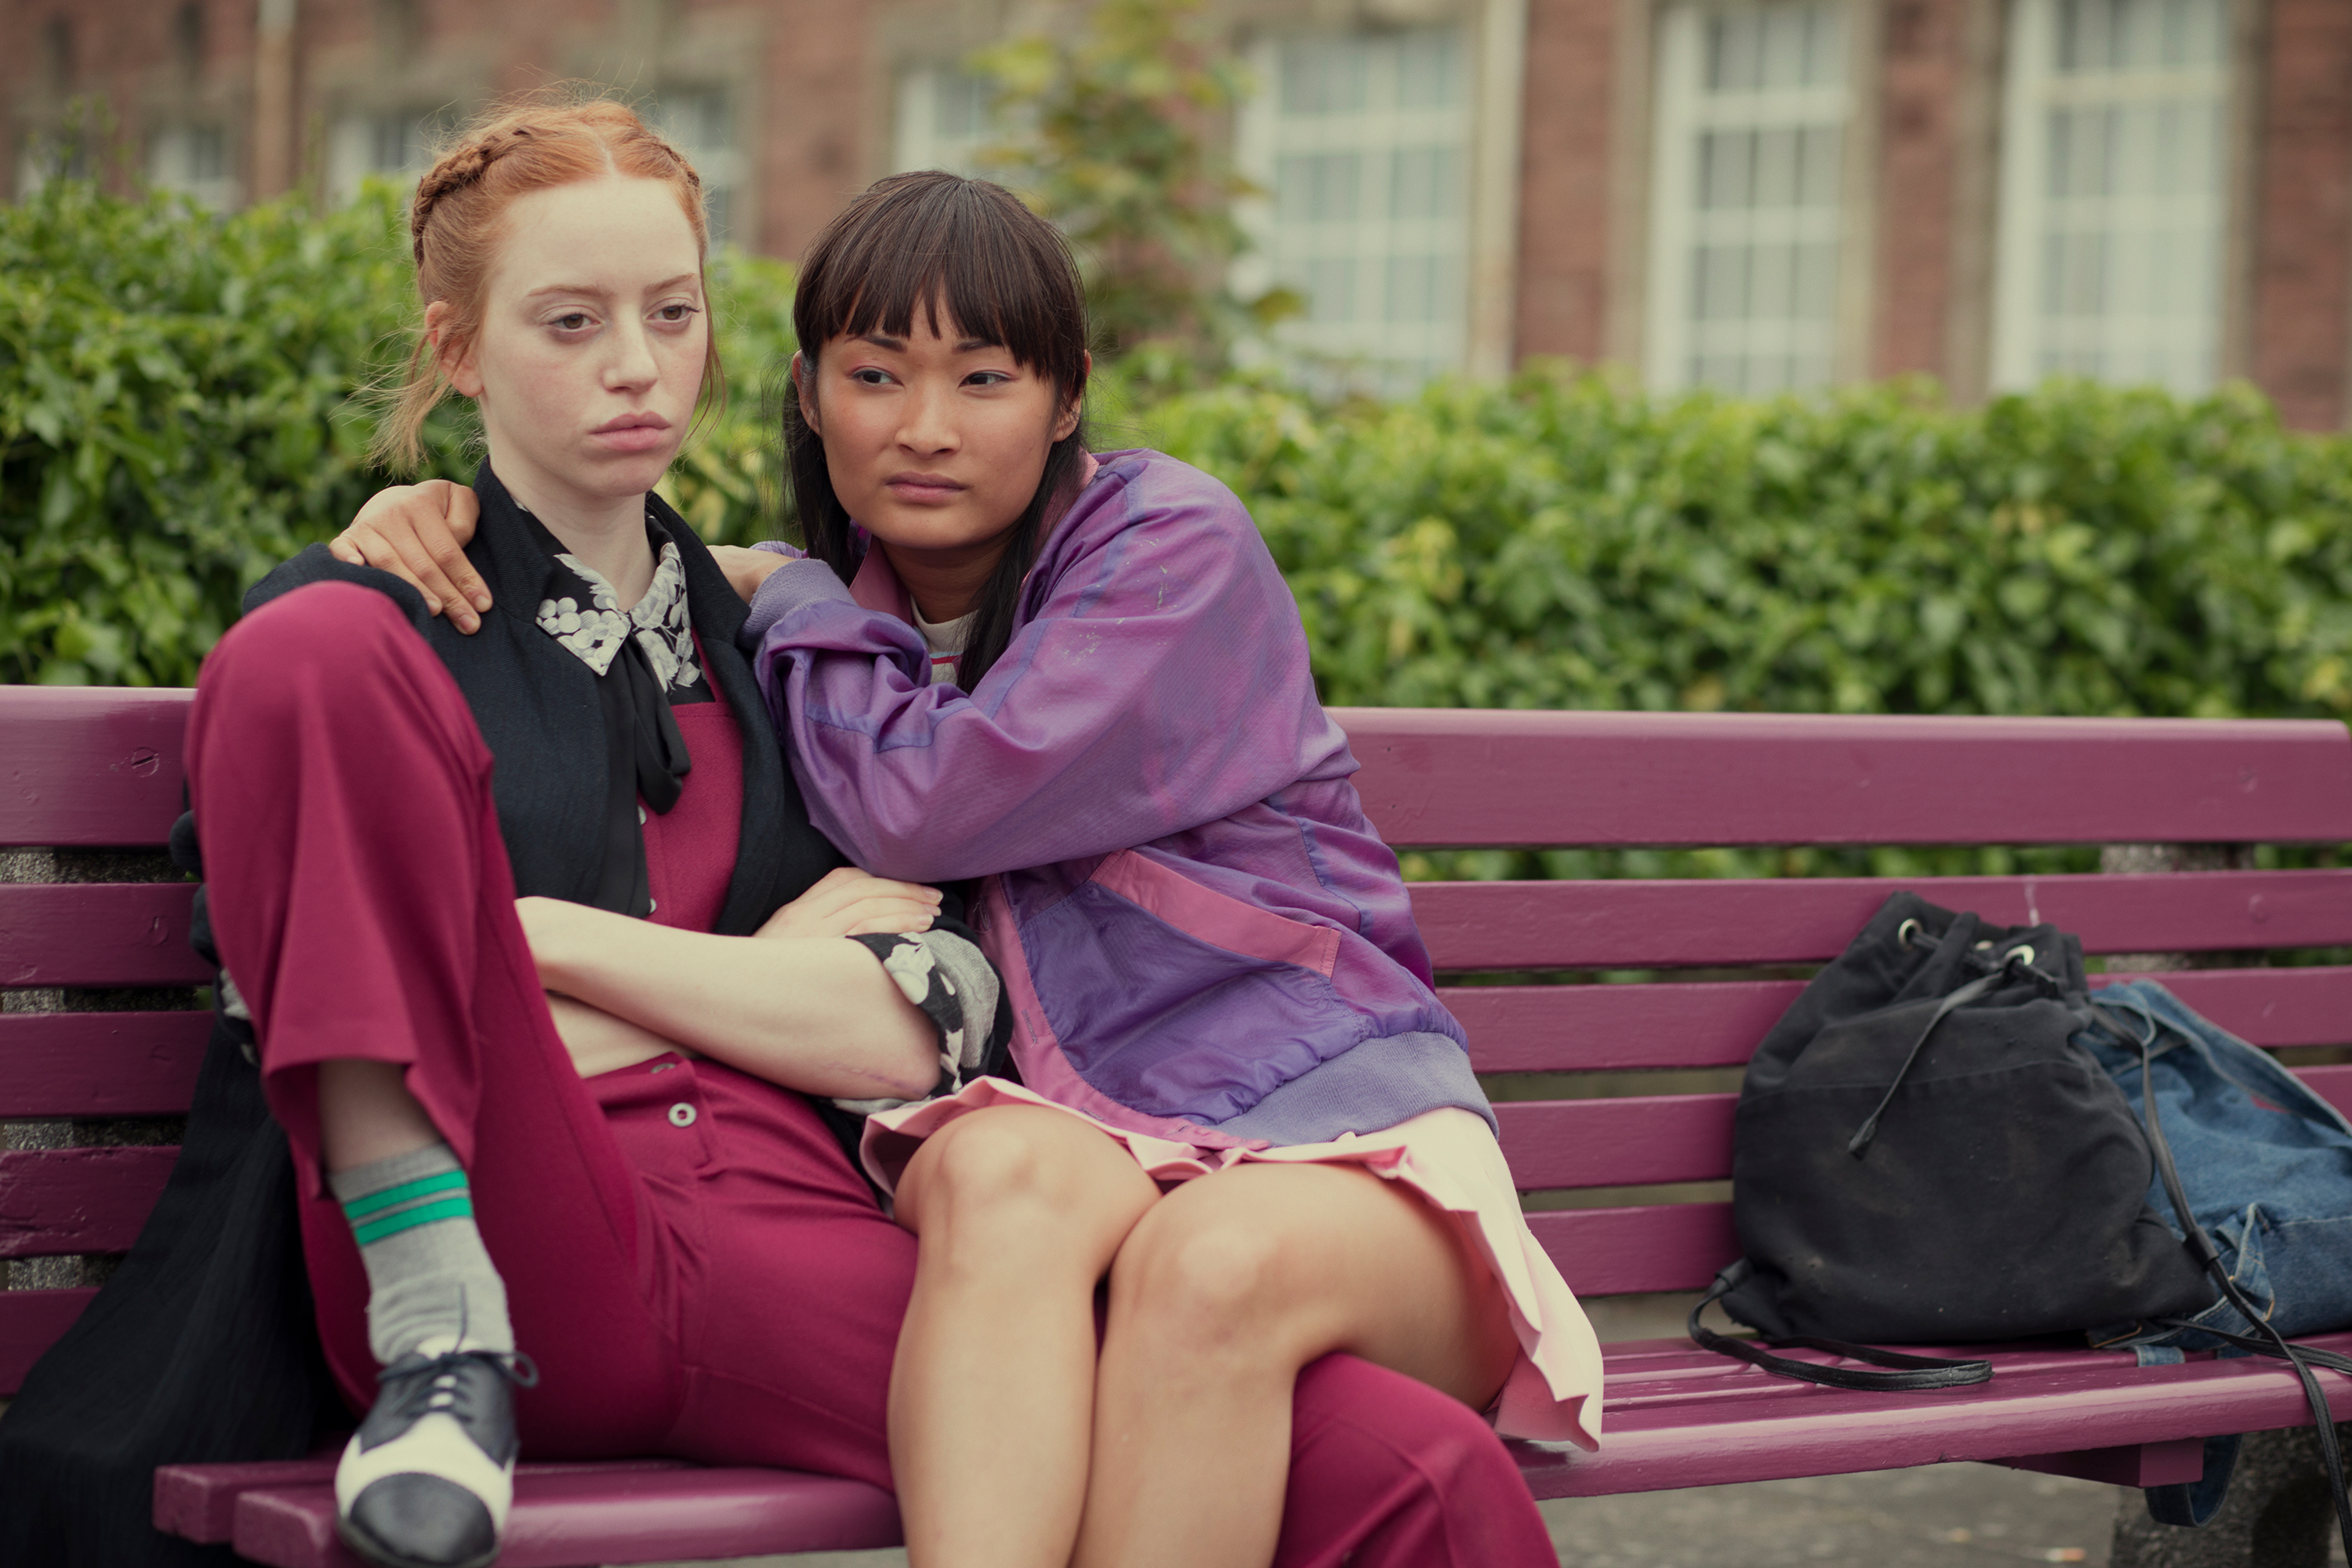 Netflix Lesbian Porn - why you need to watch netflix's 'sex education' - i-D